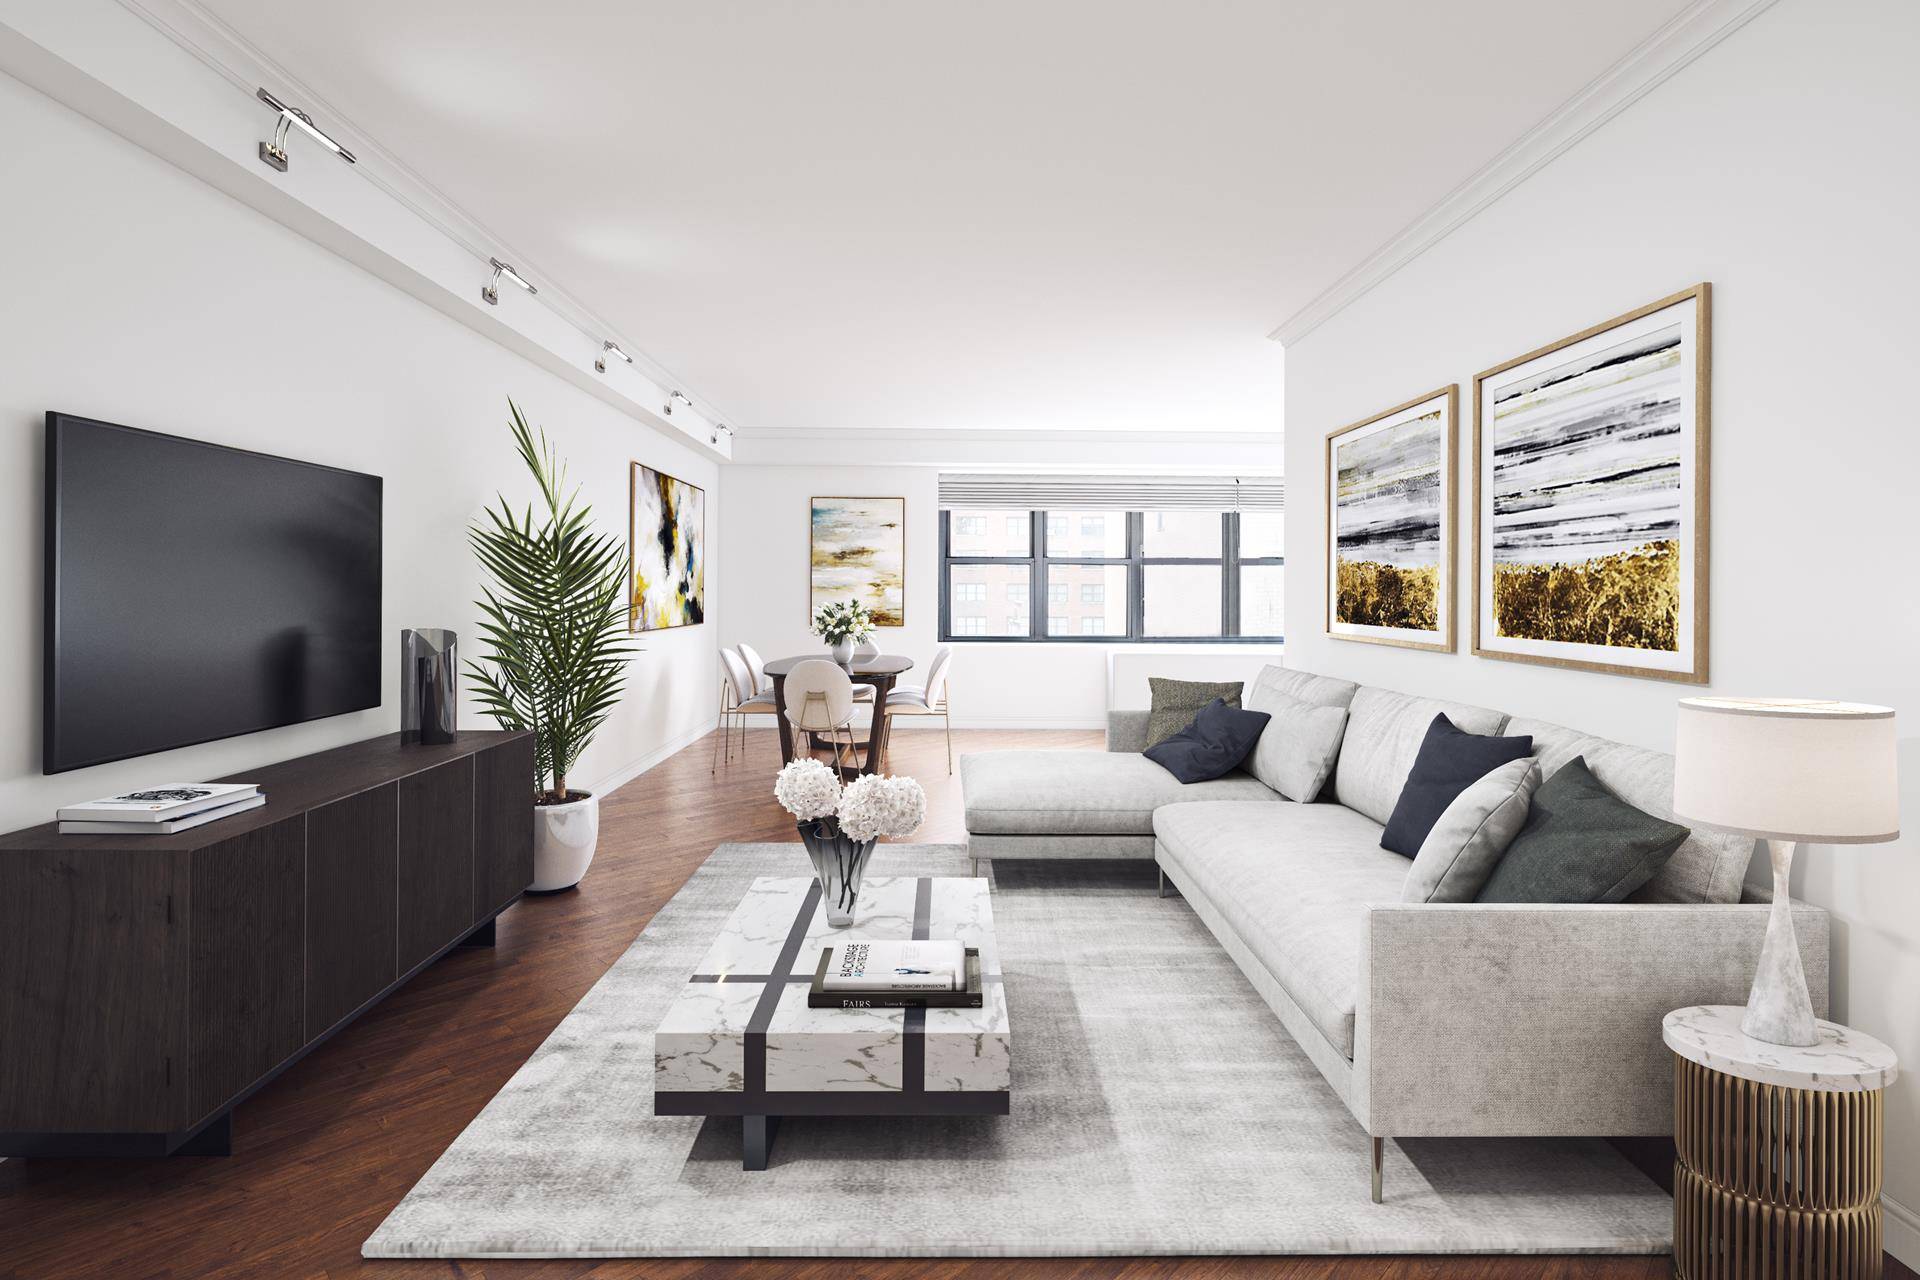 MUST SEE ! Residence 8A is an expansive alcove studio JR 1 bedroom corner unit apartment in the coveted Murray Hill House.